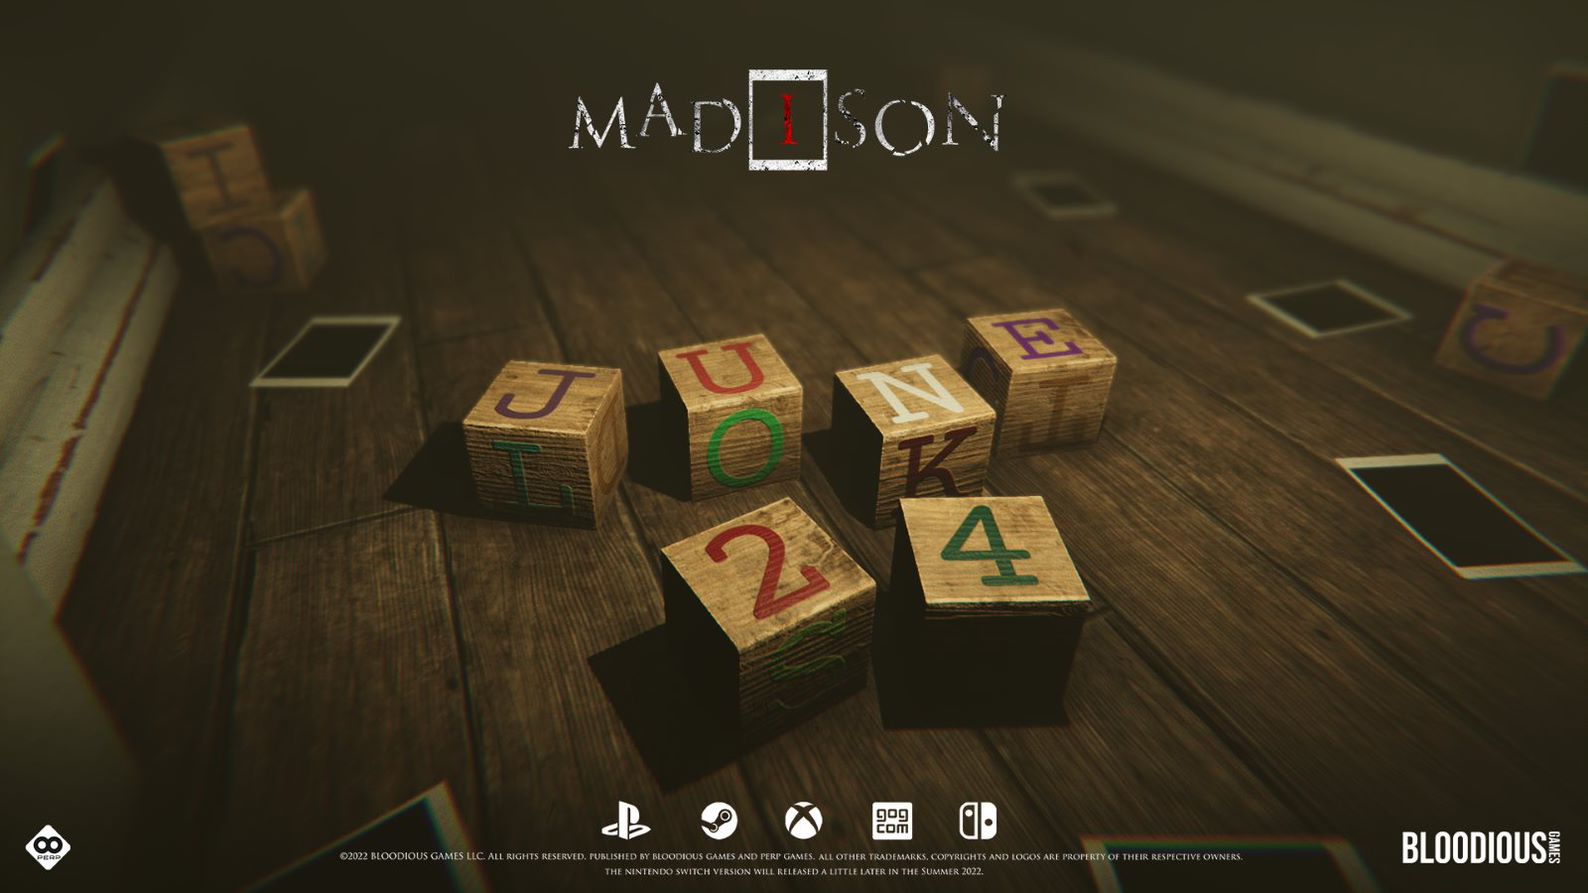 The-videotape-and-the-demon-horror-Madison-will-be-released-on-PC-Xbox-and-PlayStation-4-on-June-24th-June